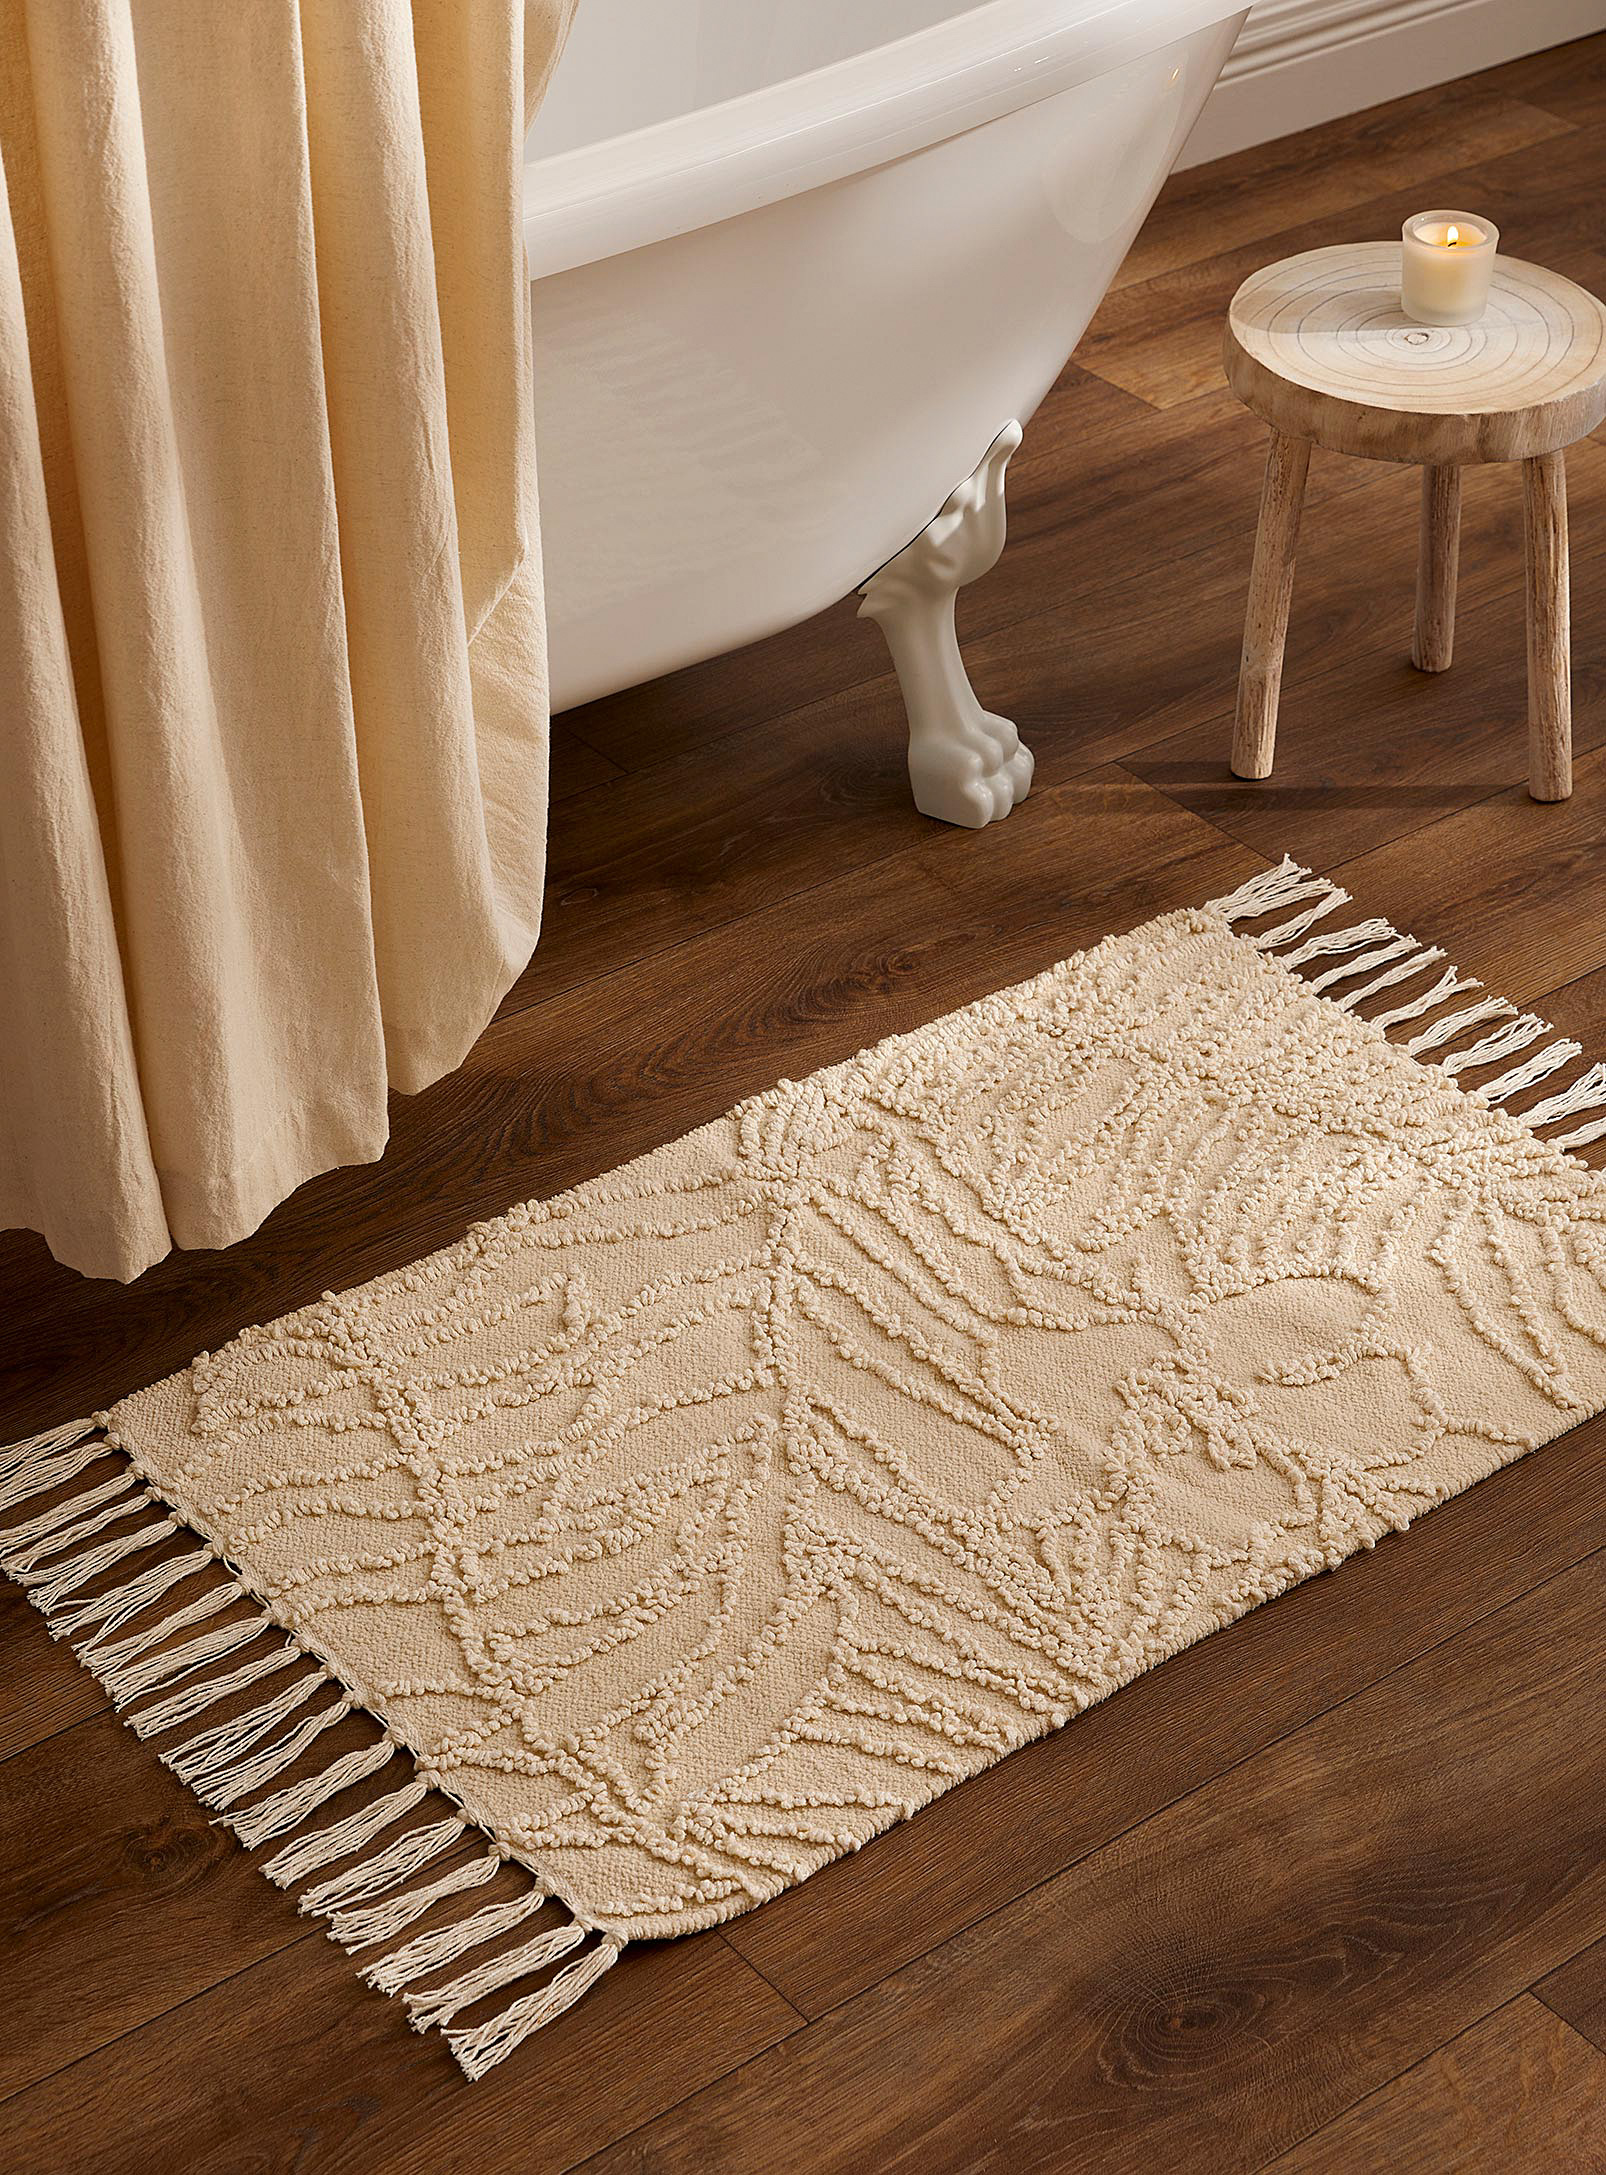 Simons Maison - Embossed knot leaves recycled cotton bath mat 50 x 80 cm